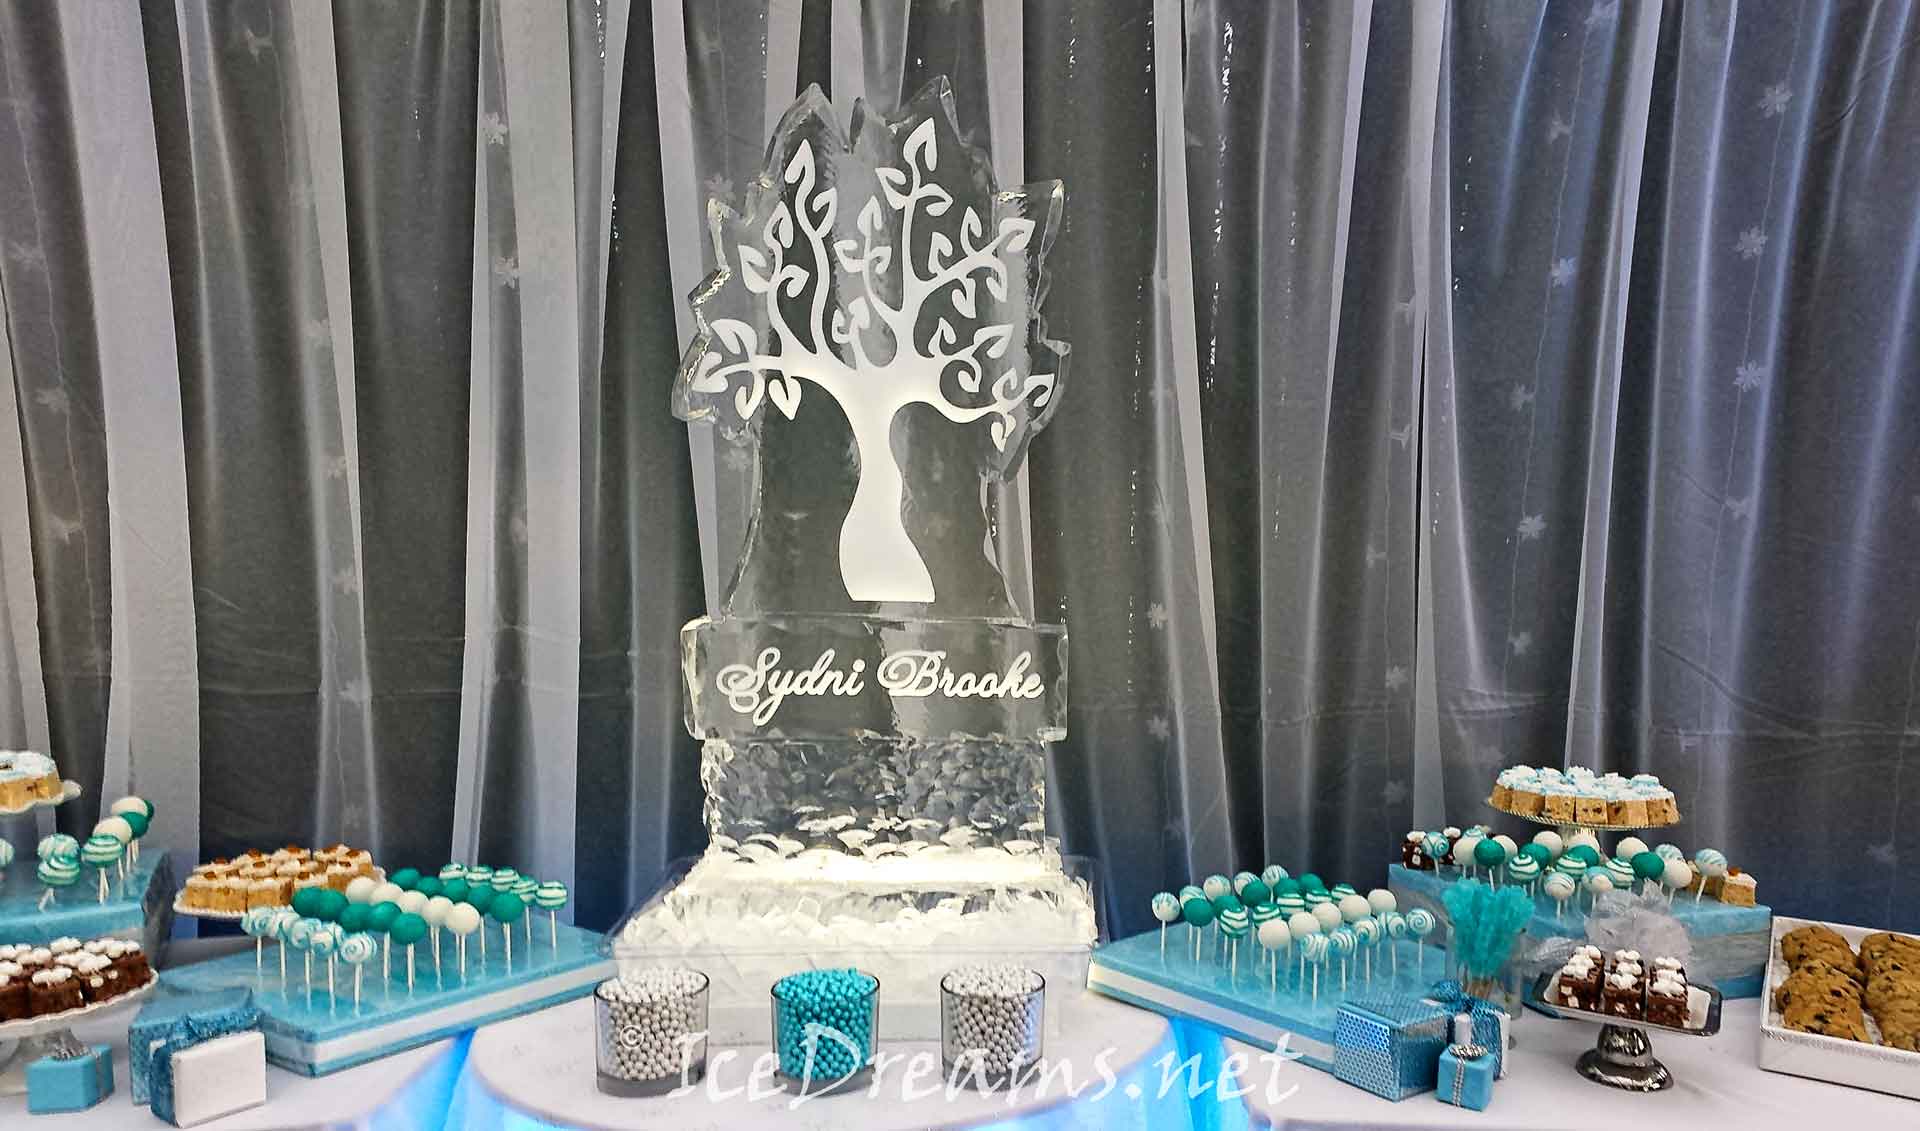 Variety of ice sculptures designed for parties